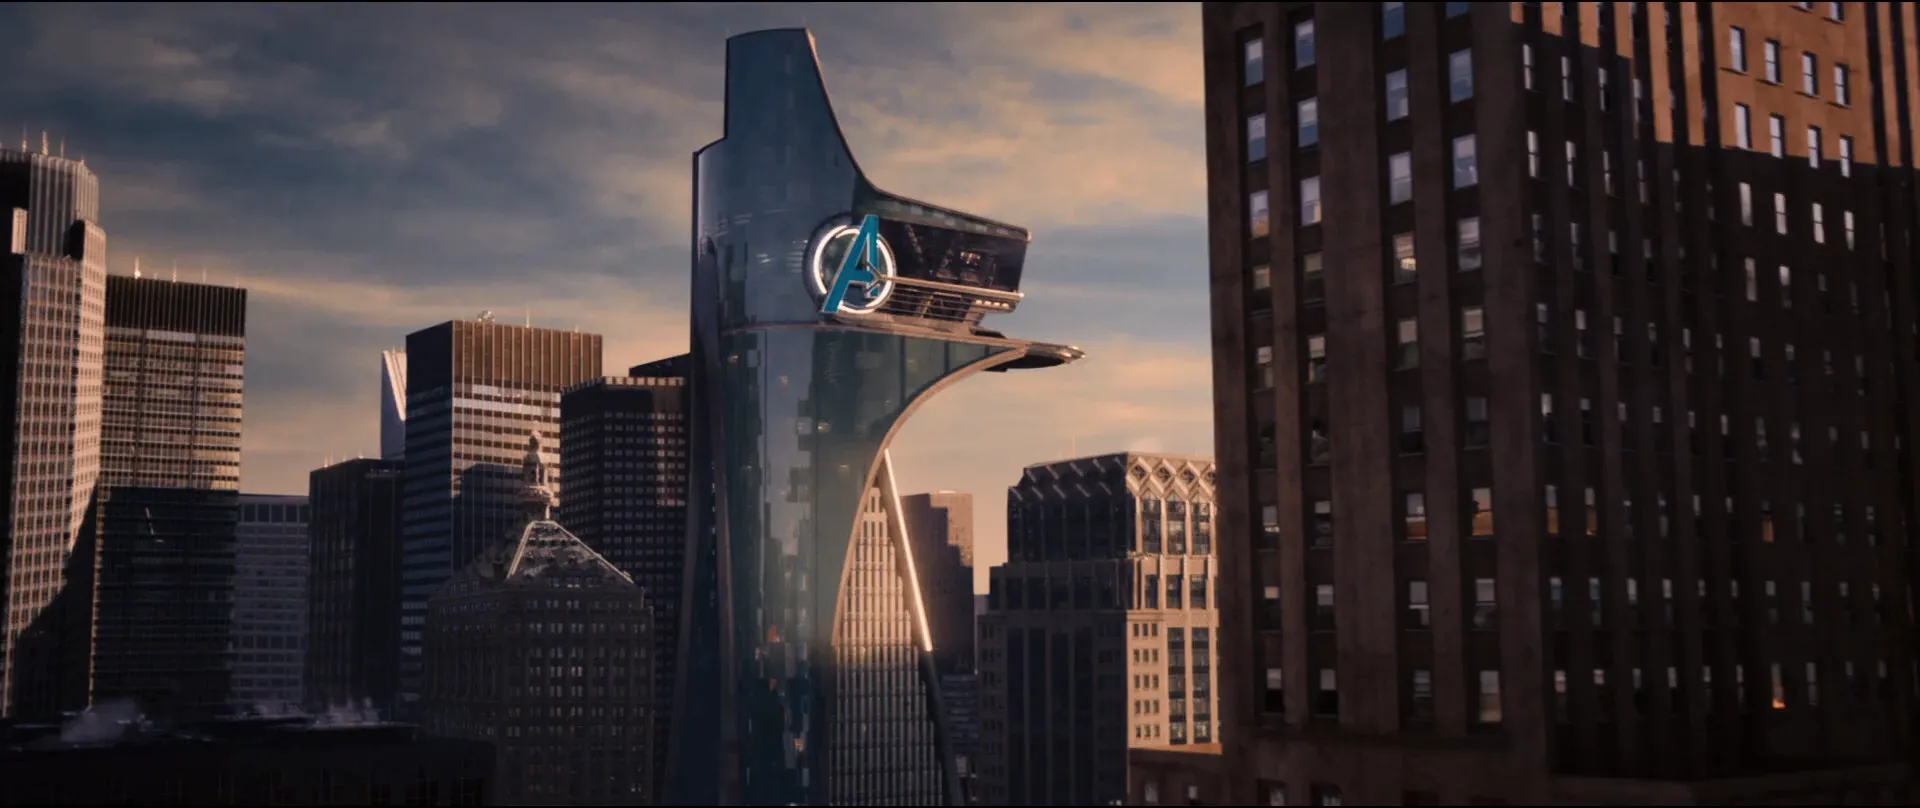 The Avengers Tower in New York. It is a glass building with a stylised “A” in blue.